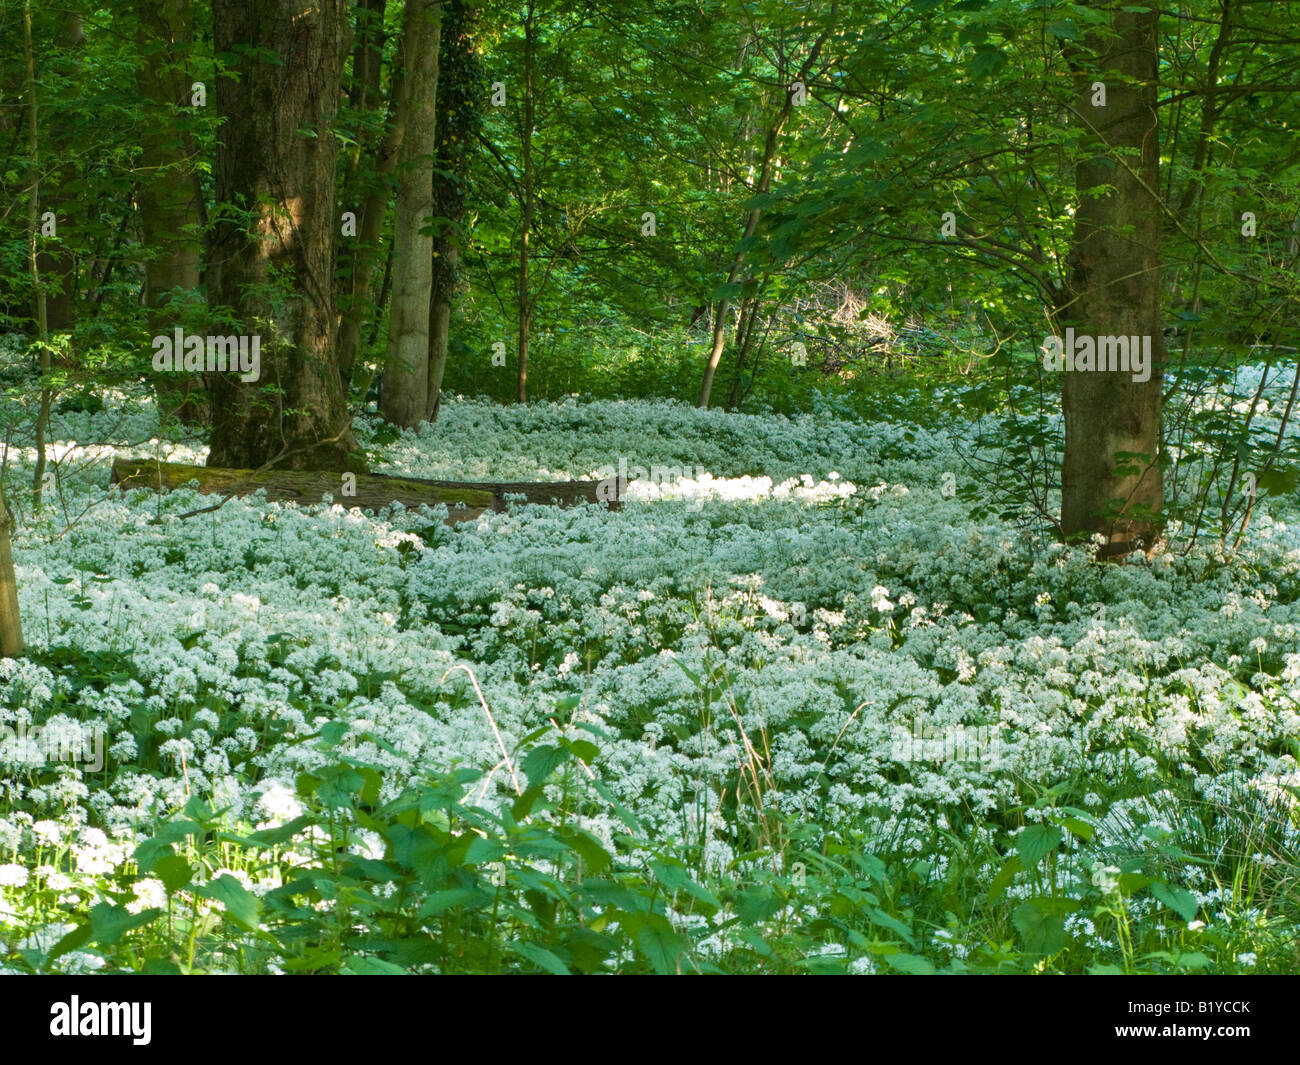 Native Woodland with Ramsons in full bloom Stock Photo